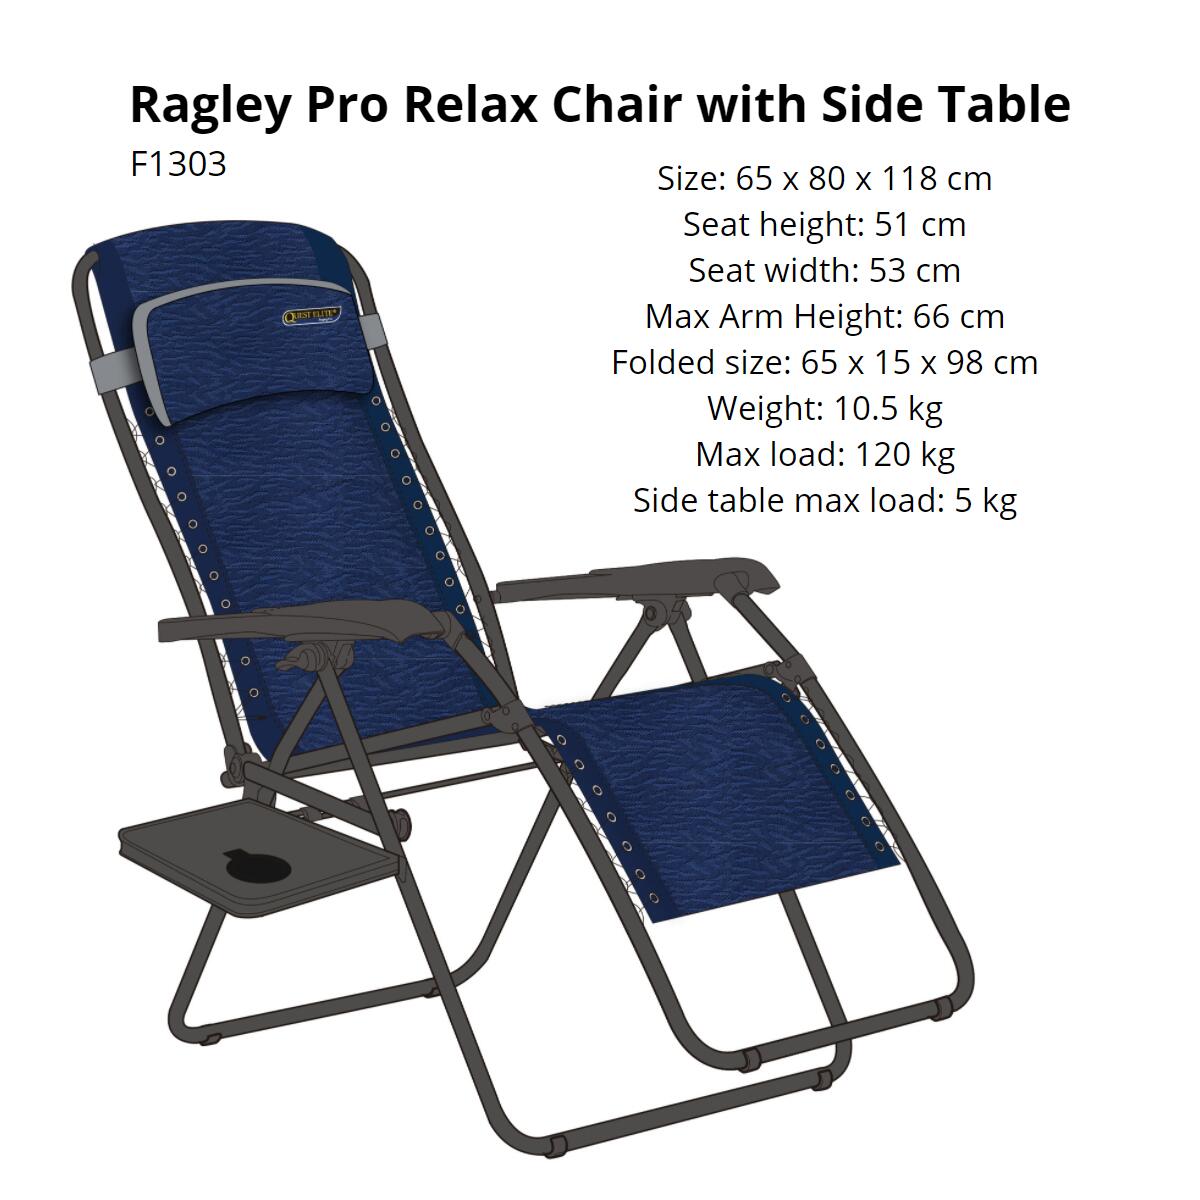 Quest Ragley Pro Relax Chair with Side Table 5/6